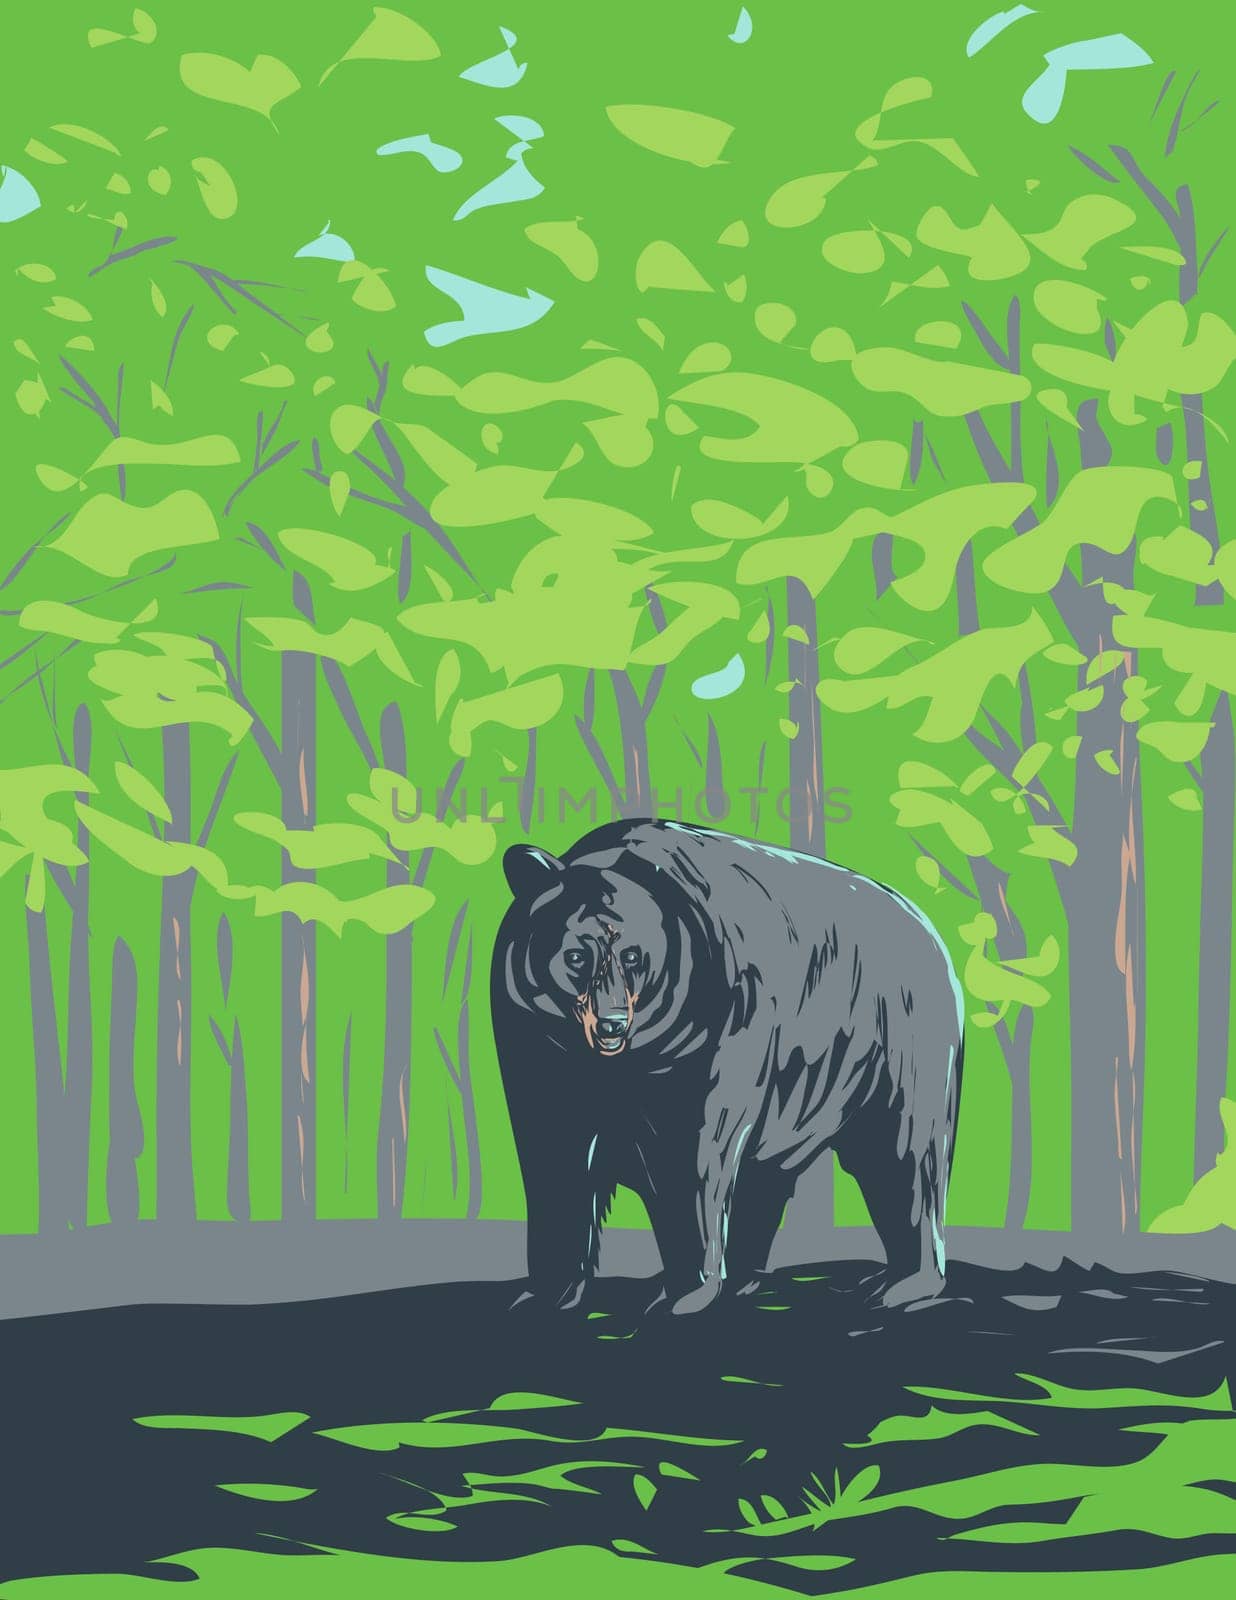 WPA poster art of an American black bear Ursus americanus or baribal endemic to North America in Shenandoah National Park, Virginia done in works project administration or federal art project style.
